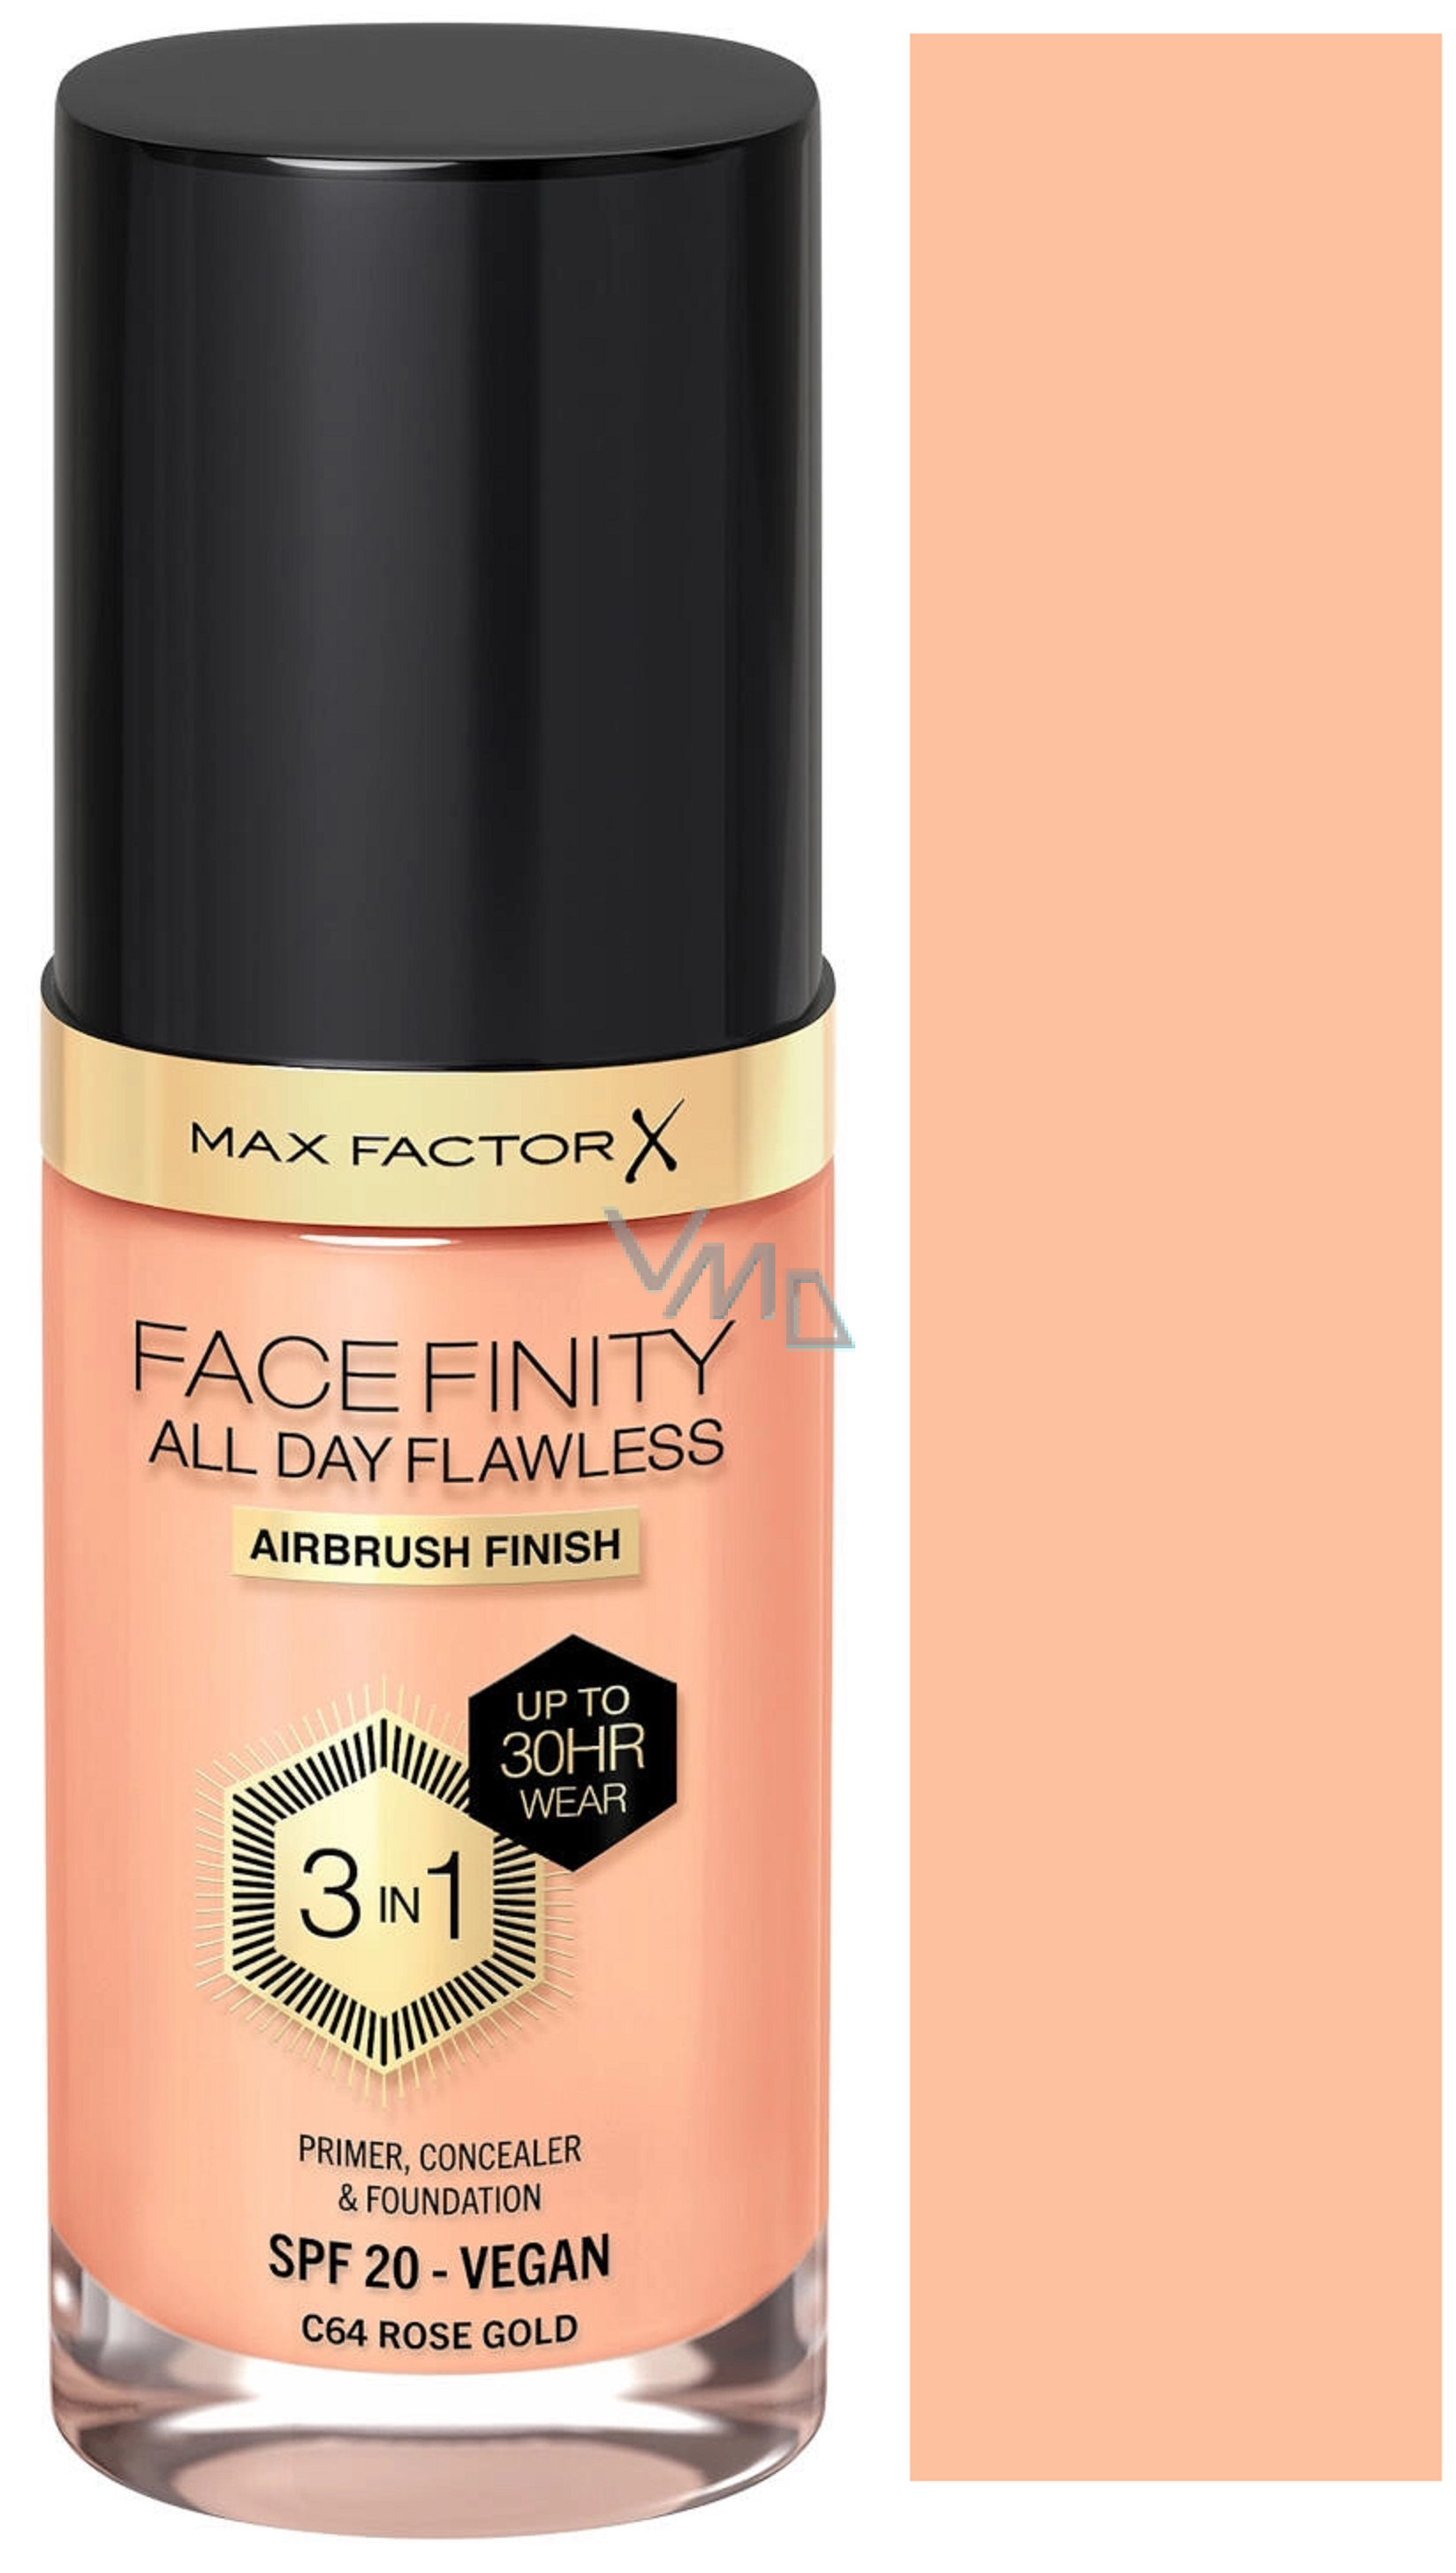 Max Factor Facefinity All Day ml - VMD Flawless - Rose parfumerie 3in1 drogerie Gold C64 Make-up 30